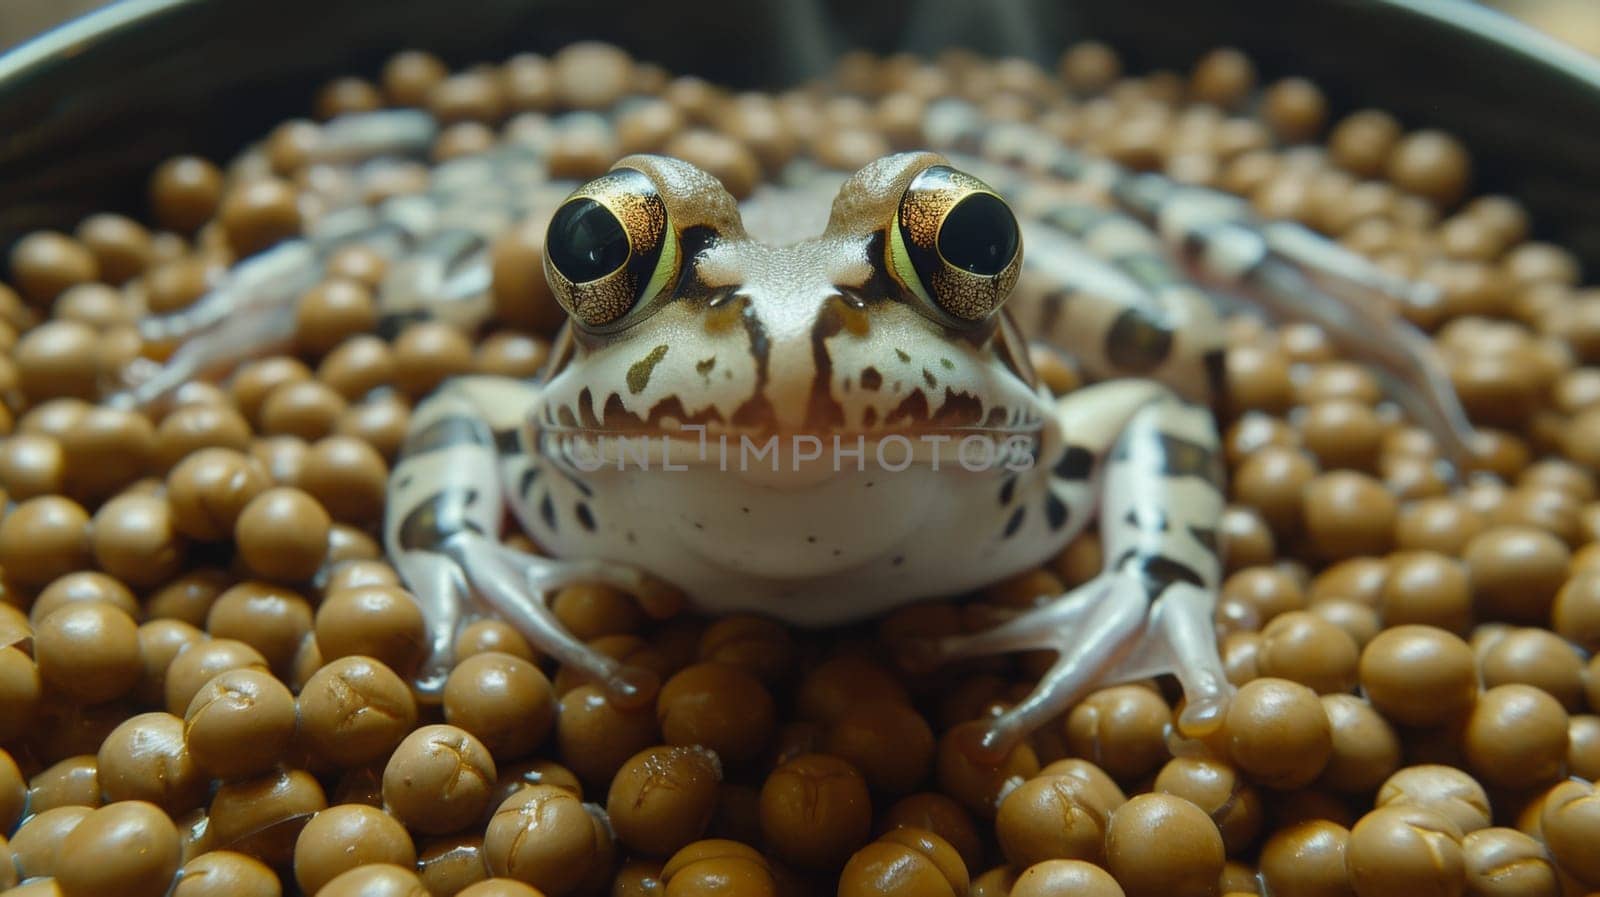 A frog sitting in a bowl of beans with its eyes open, AI by starush